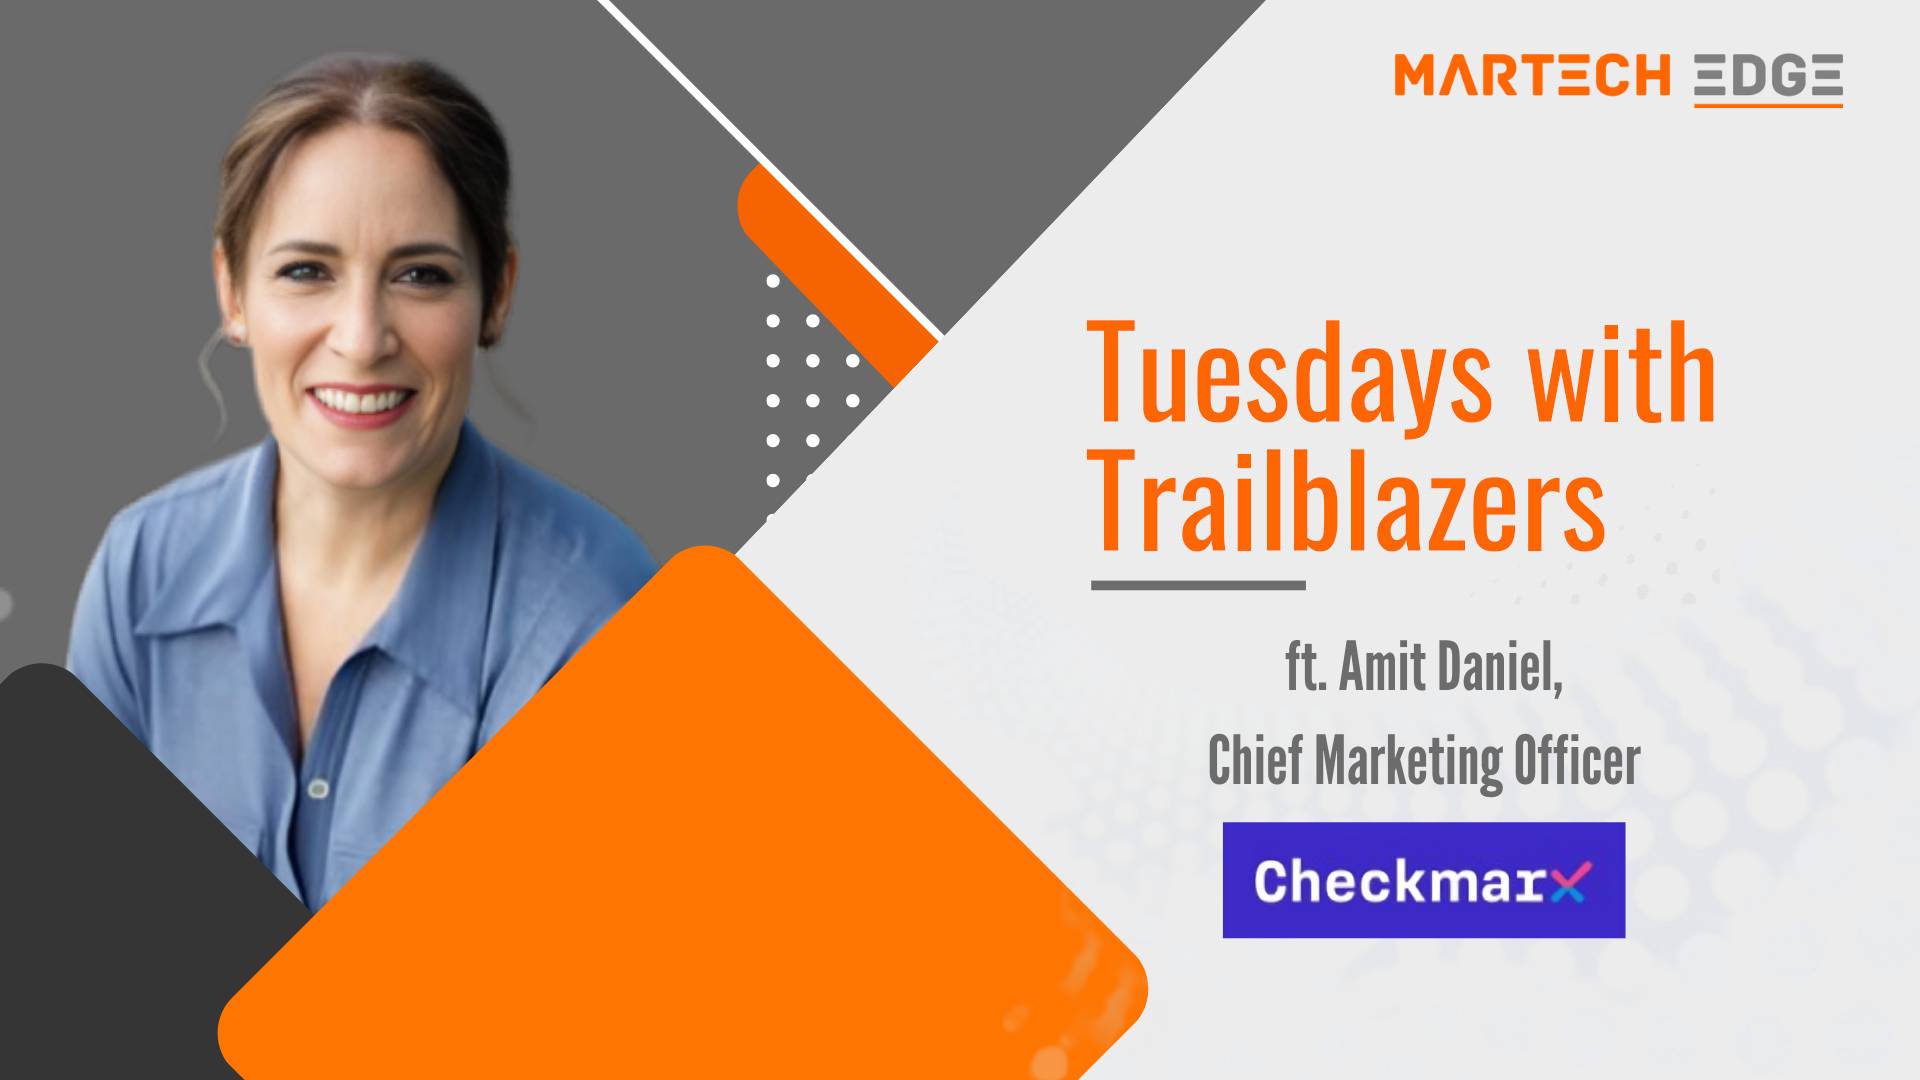  Tuesdays with Trailblazers ft. Amit Daniel, Chief Marketing Officer at Checkmarx